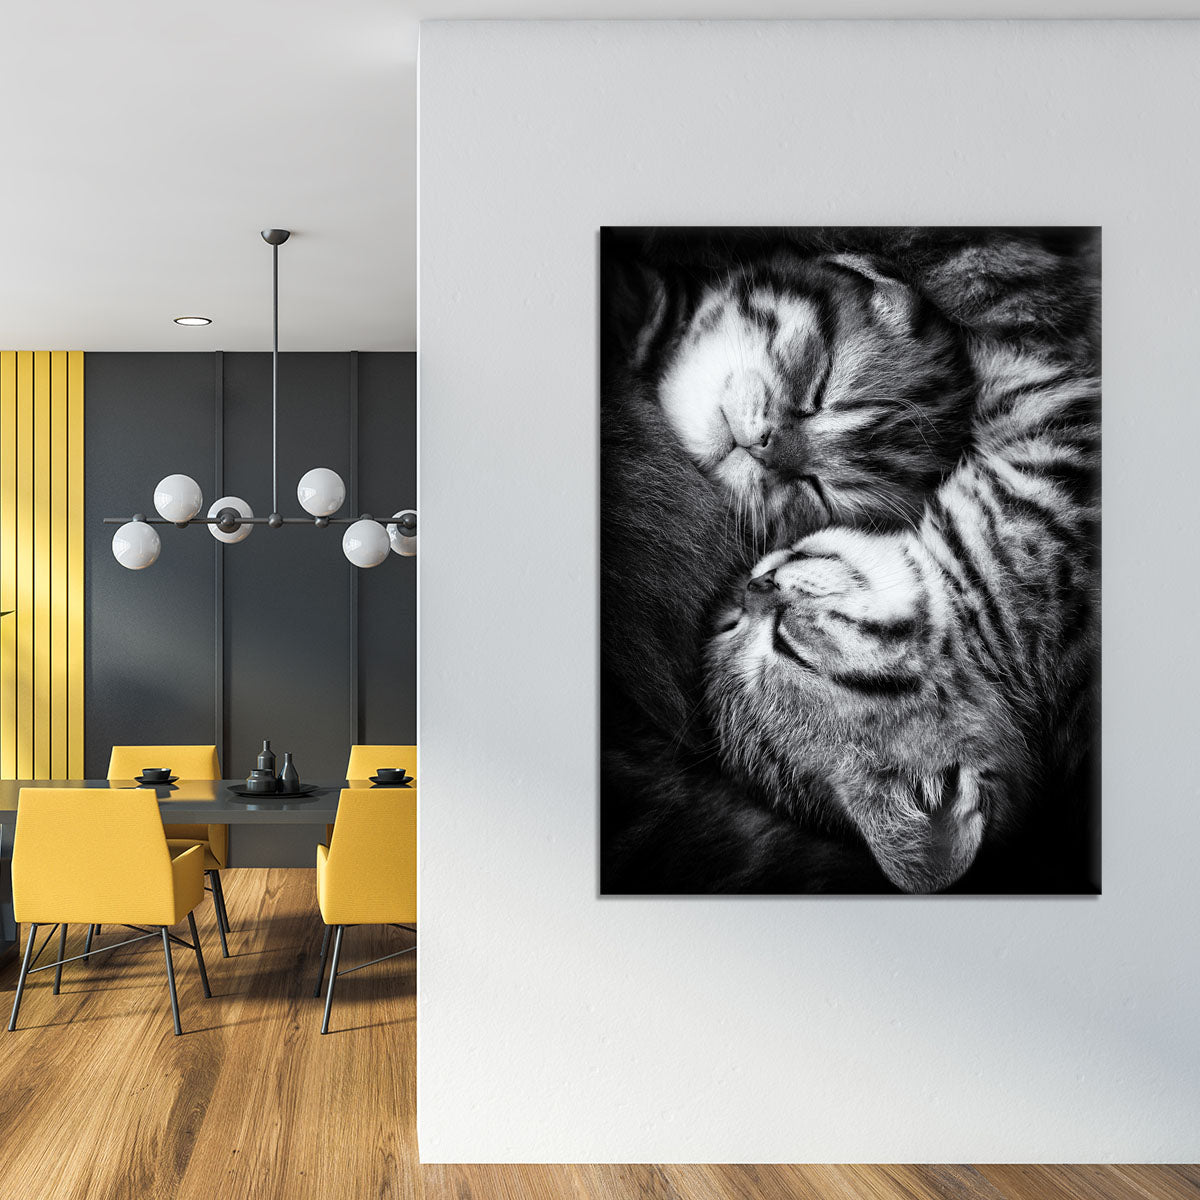 Yin and Yang Canvas Print or Poster - 1x - 4